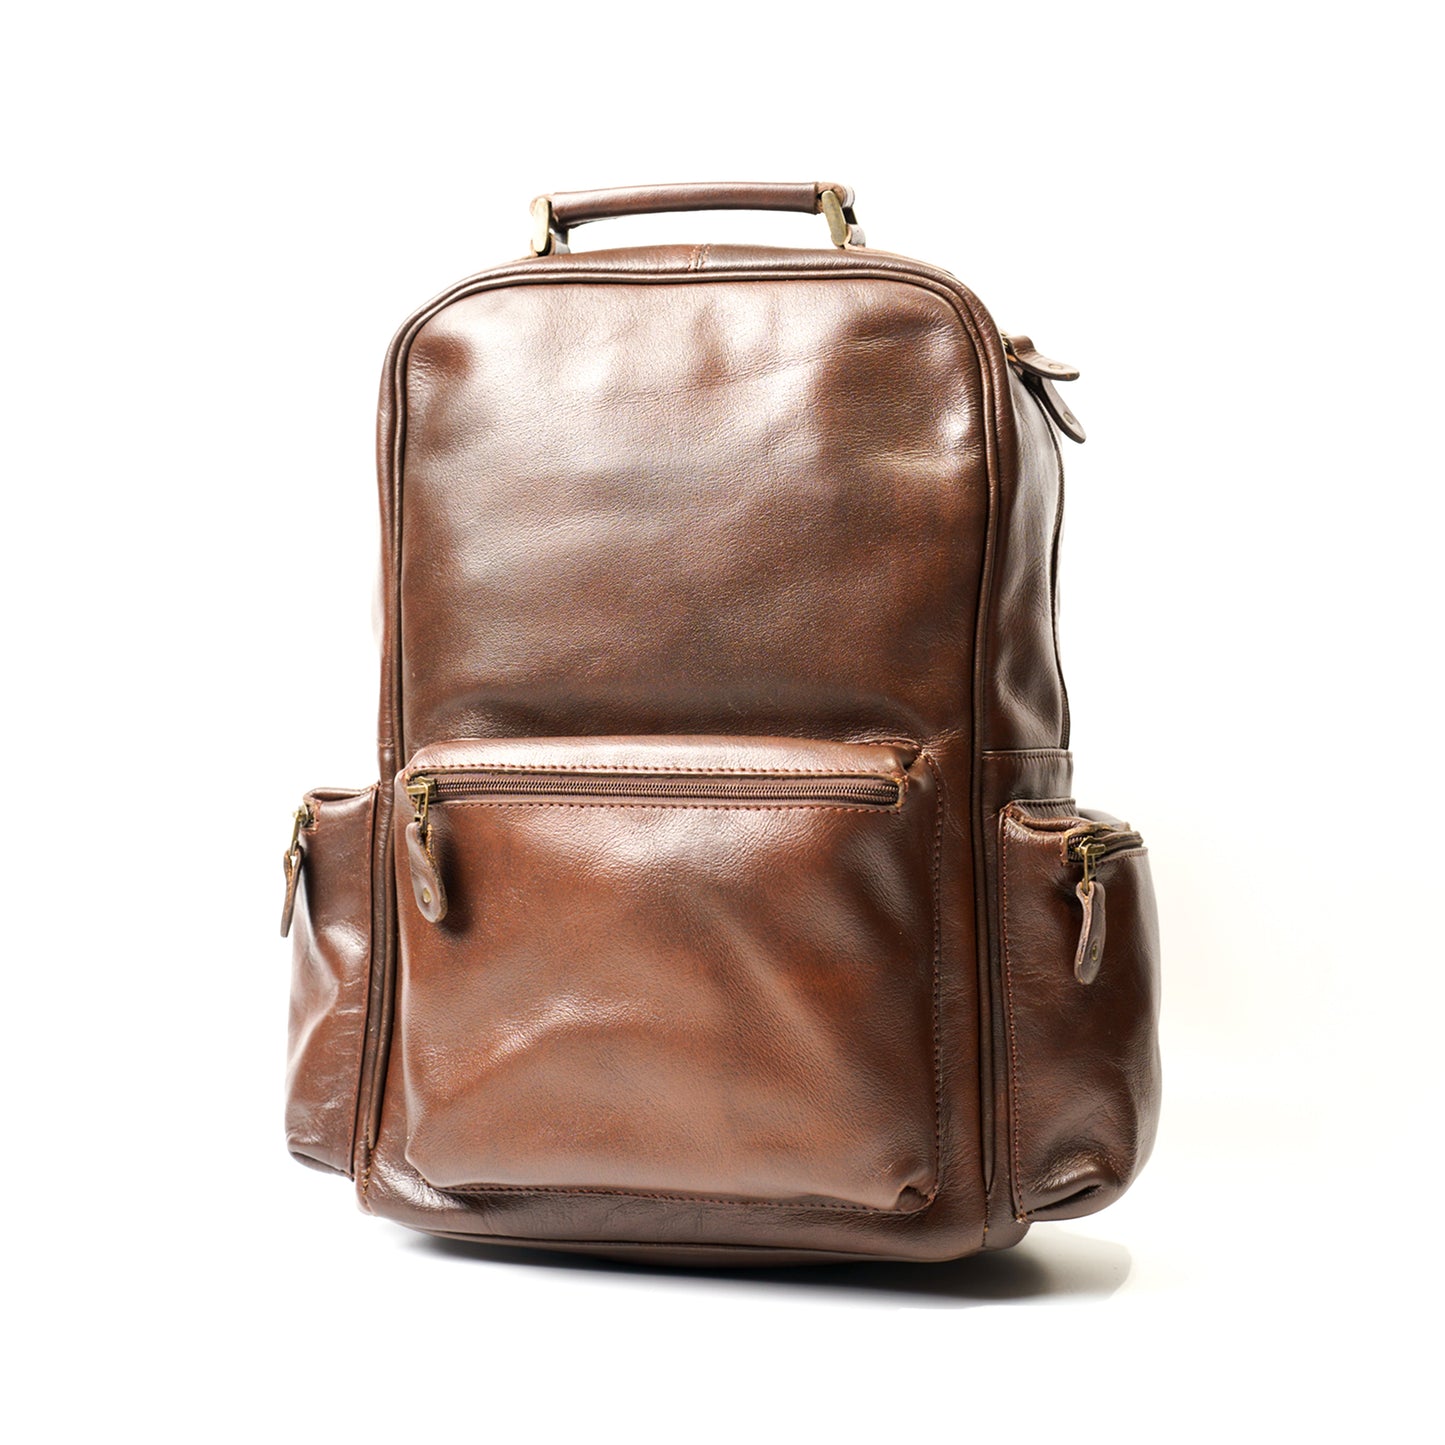 Leather Backpack Chocolate Brown with Side Pockets